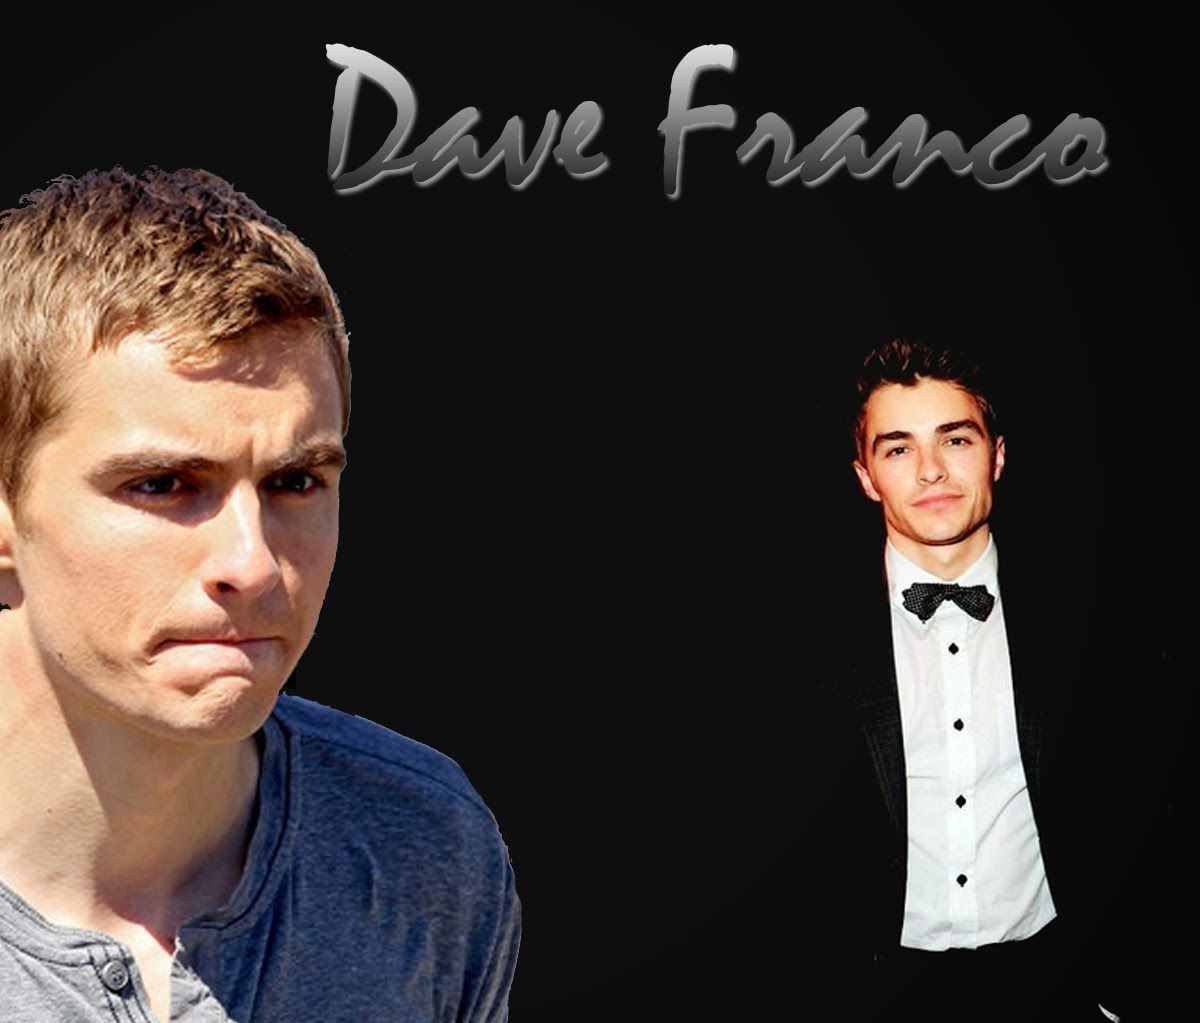 Dave Franco Wallpaper Imgkid The Image